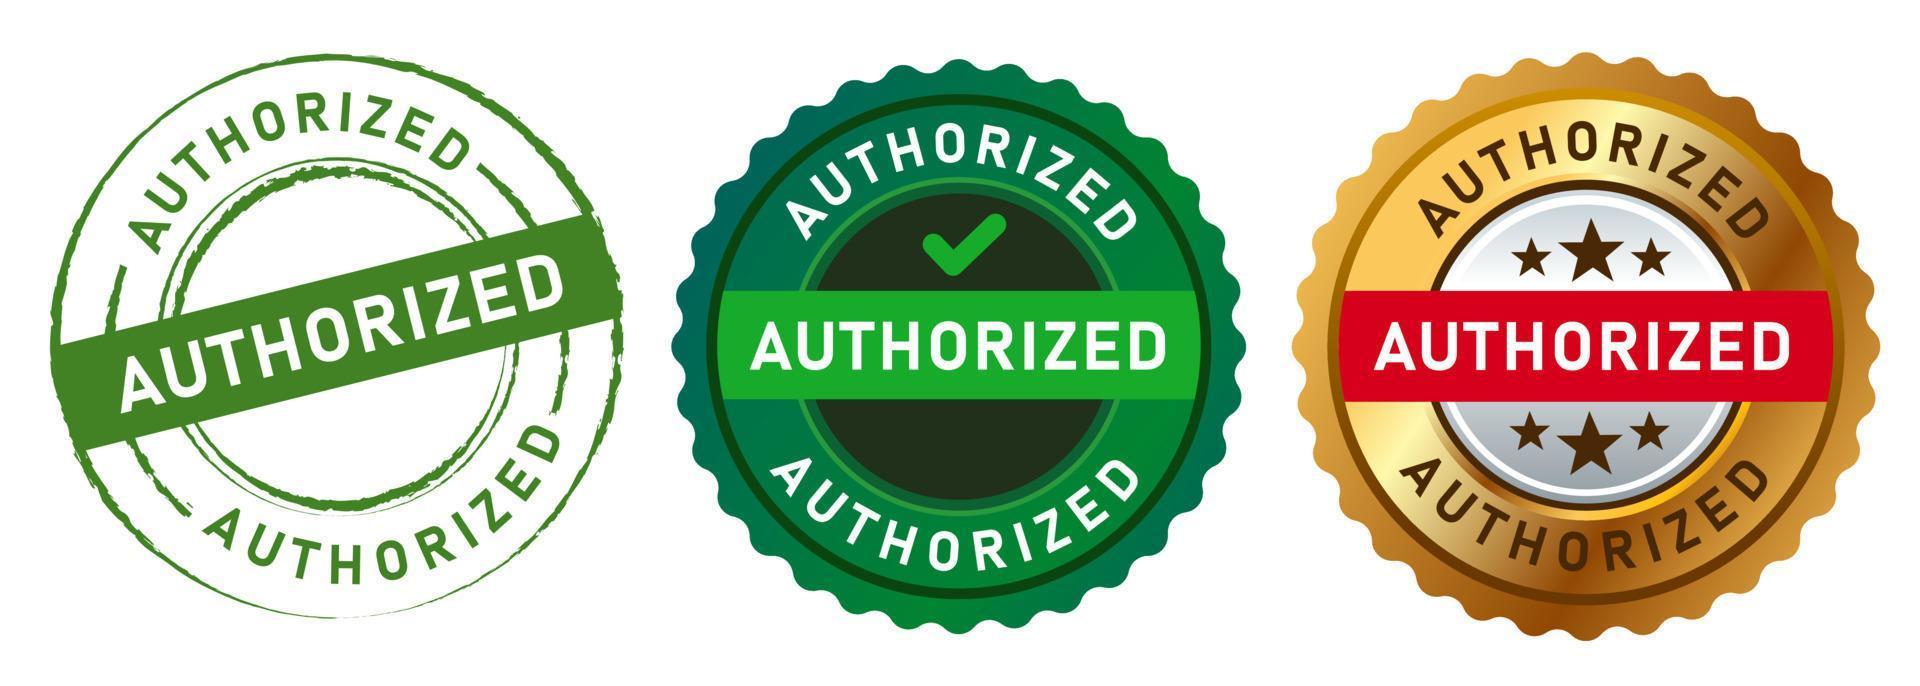 Authorized stamp logo sign sticker watermark permit by the author in green and gold design graphic vector